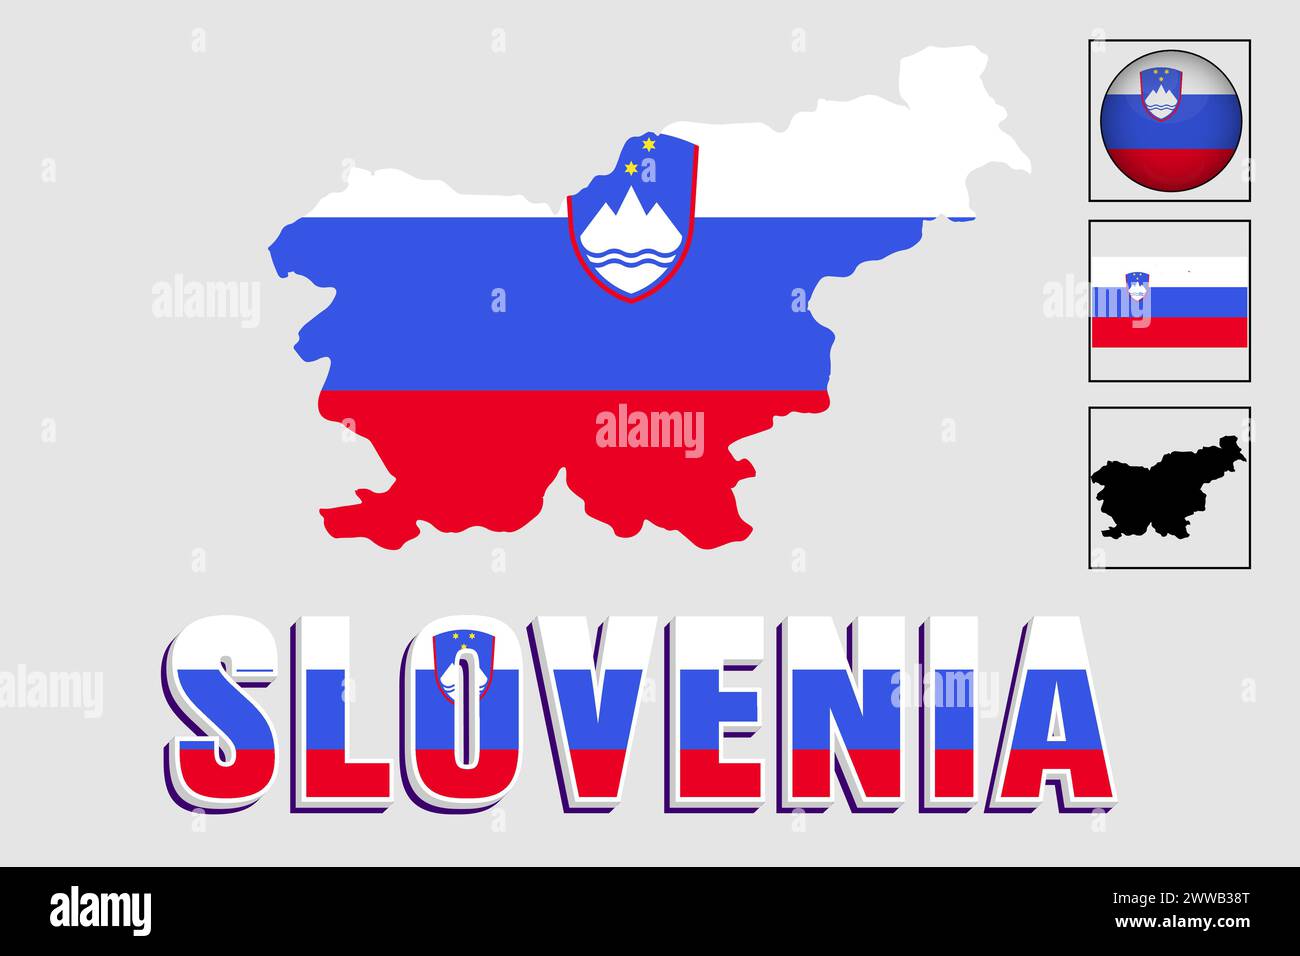 Slovakia flag and map in a vector graphic Stock Vector